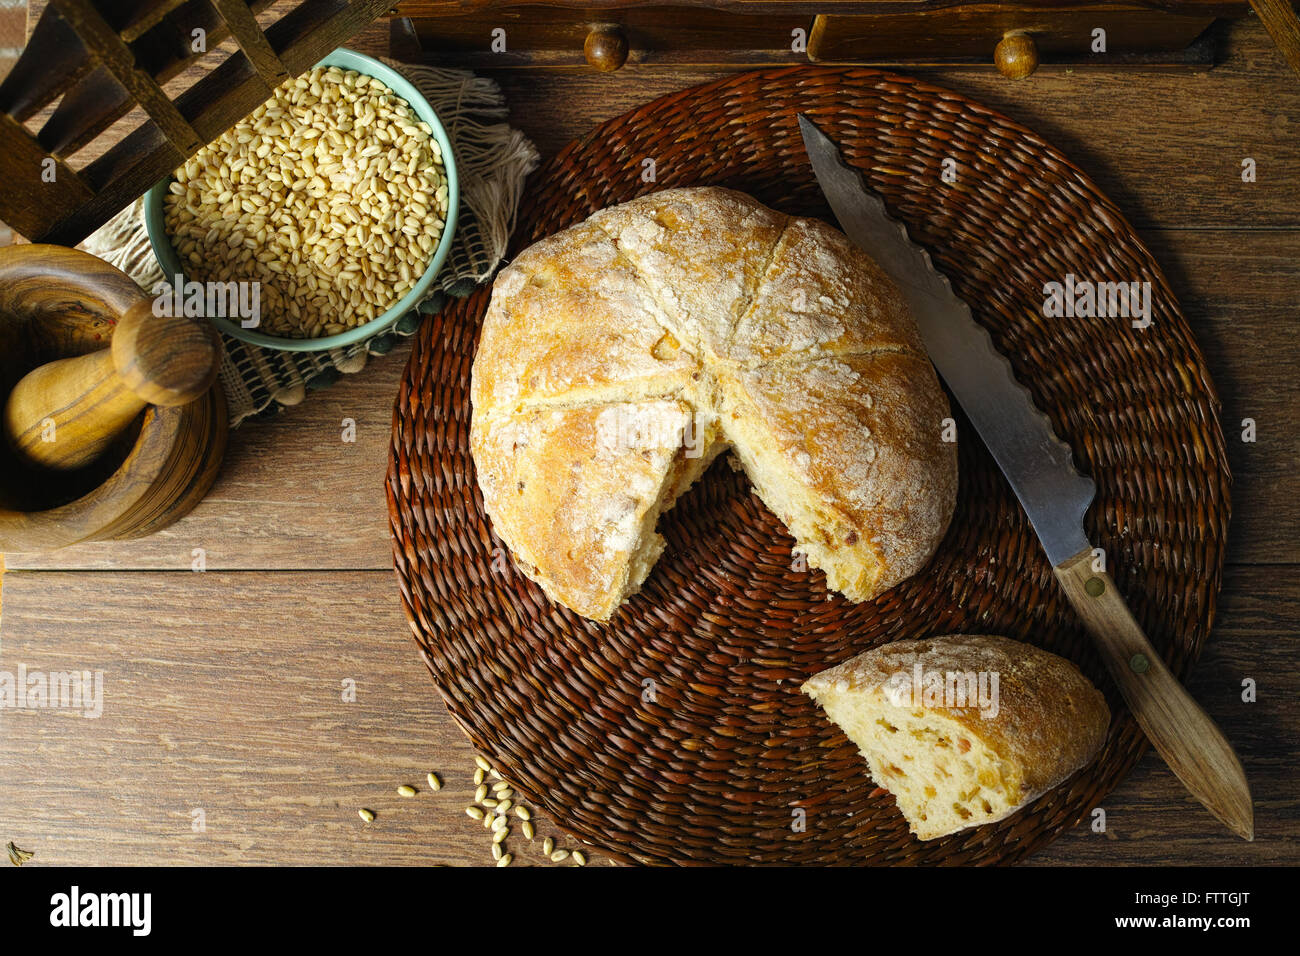 Round Loaf of Home made Bread with onion, whole wheat, in rural style on brick wall background Stock Photo